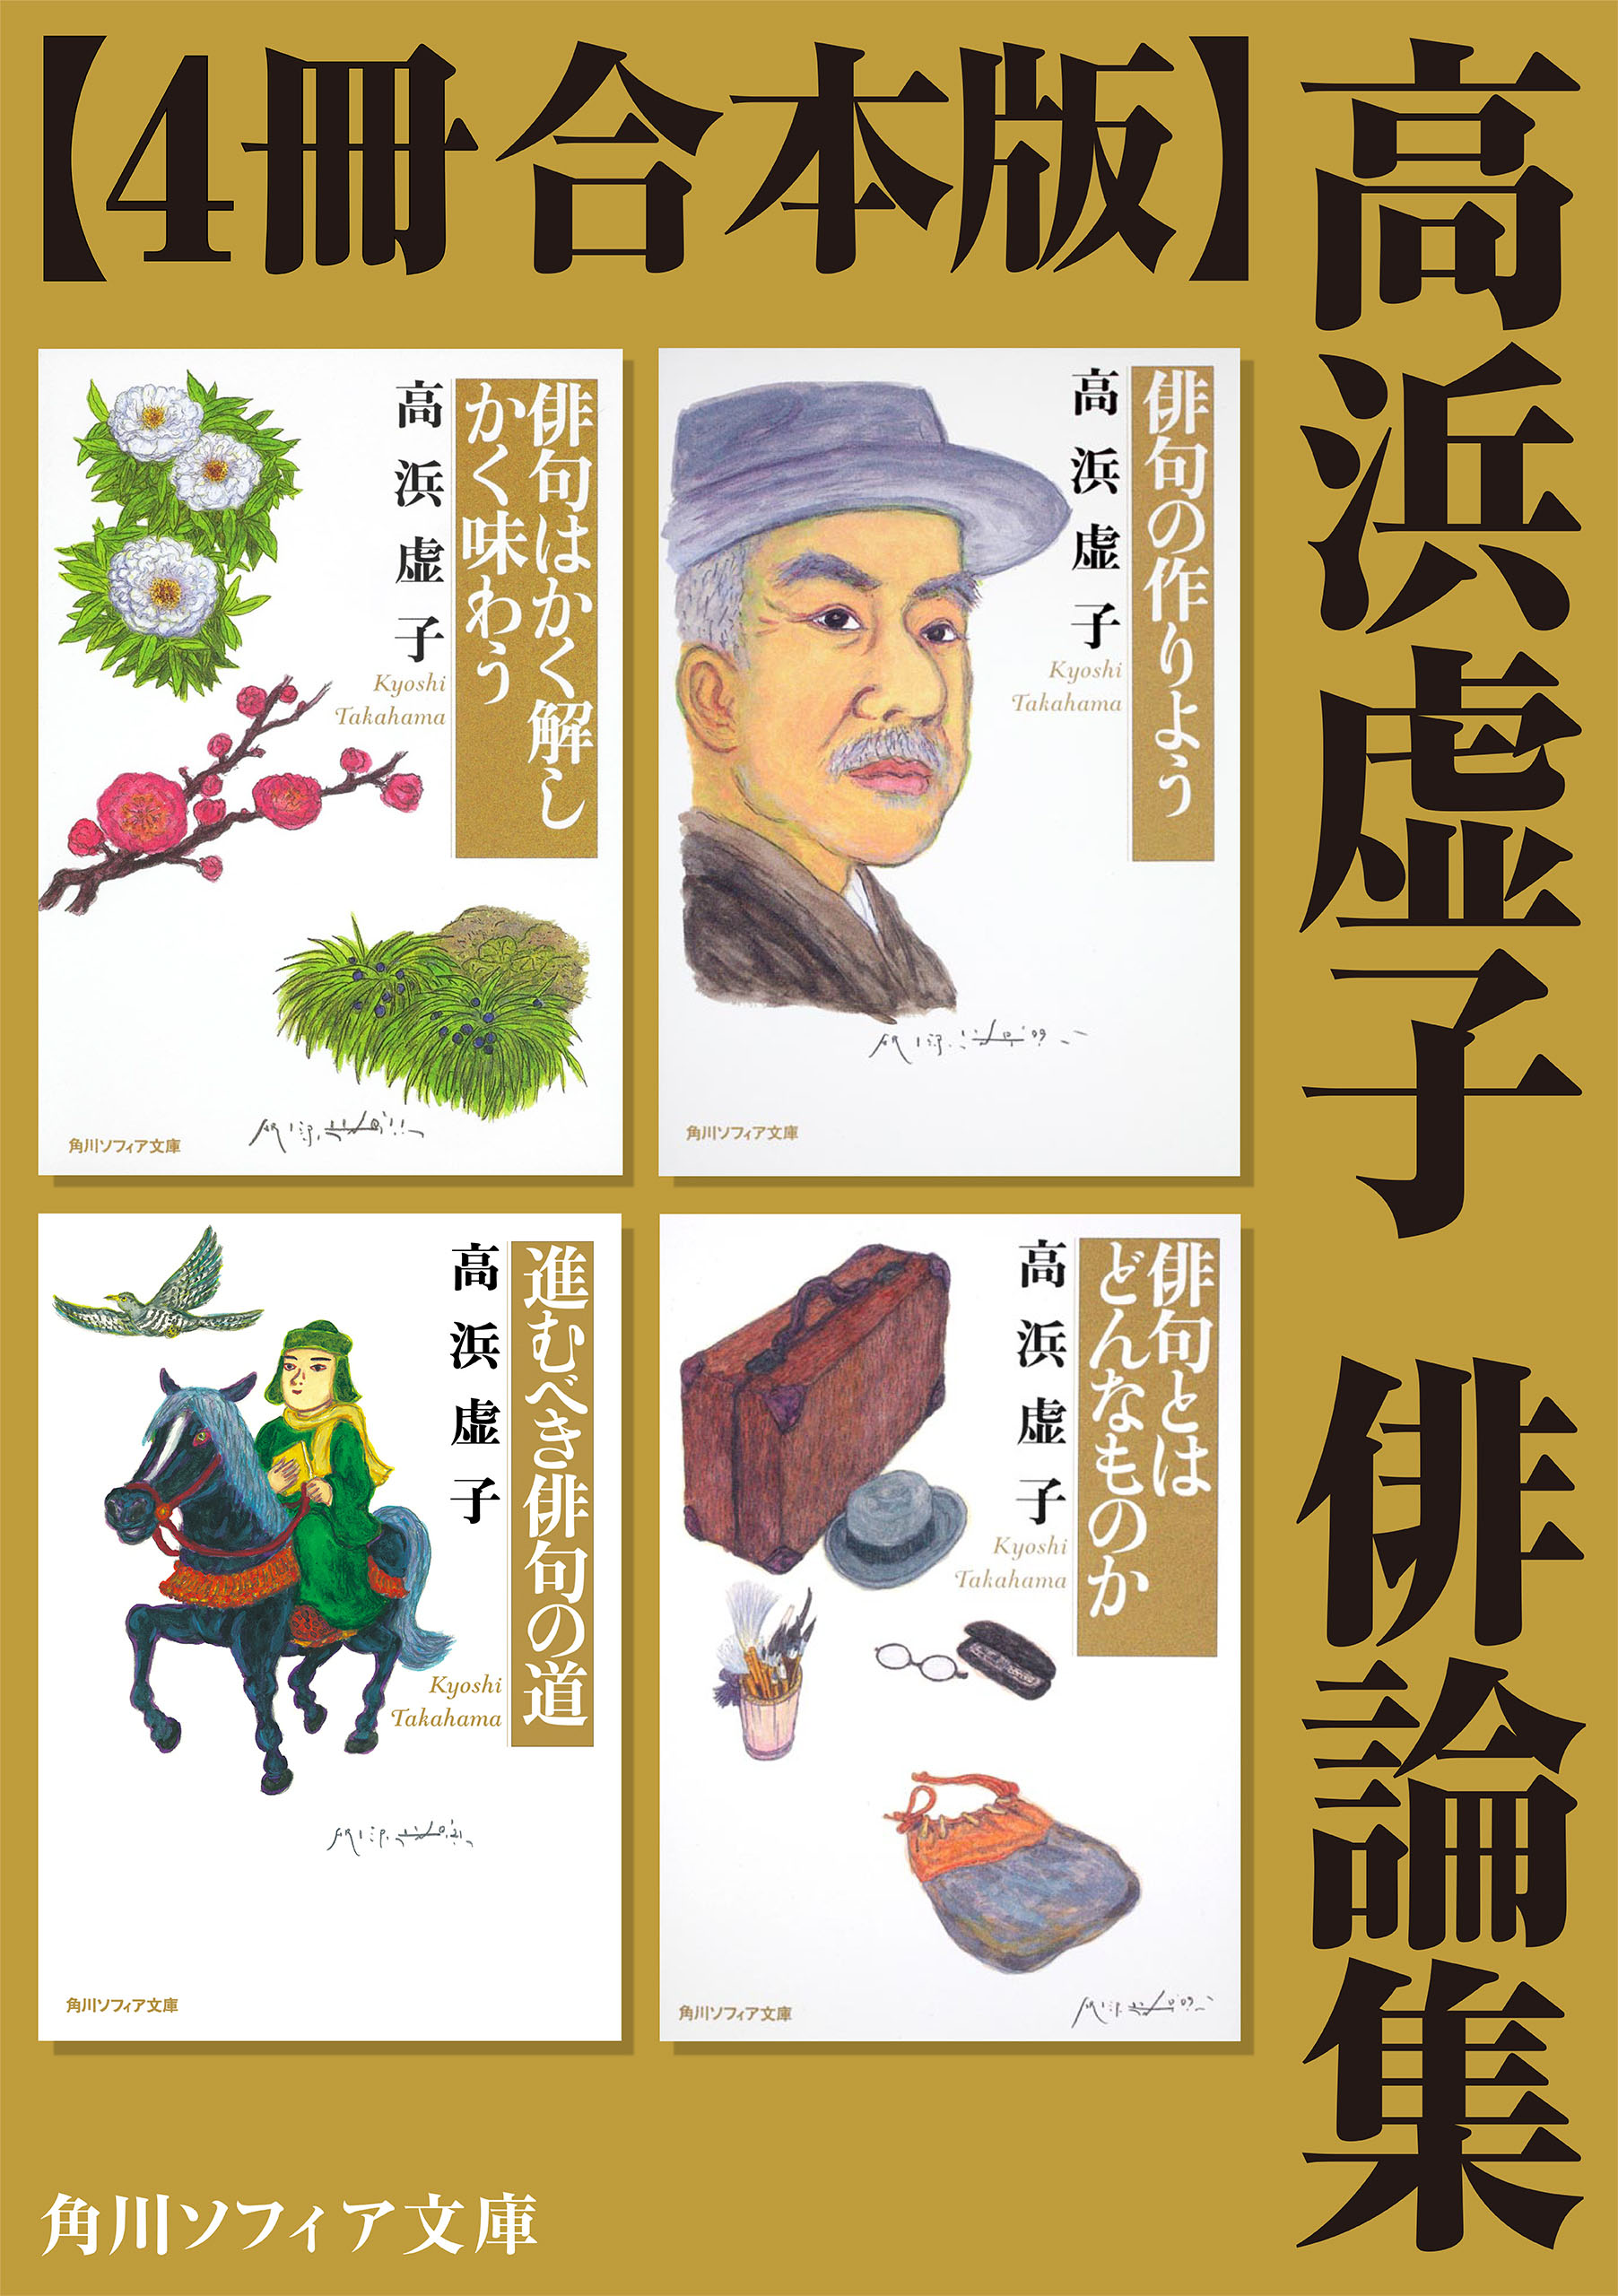 【HOTお得】高浜虚子　短冊 　　　俳句　俳人　ホトトギス　愛媛　小説　ホトトギス　文学 短冊